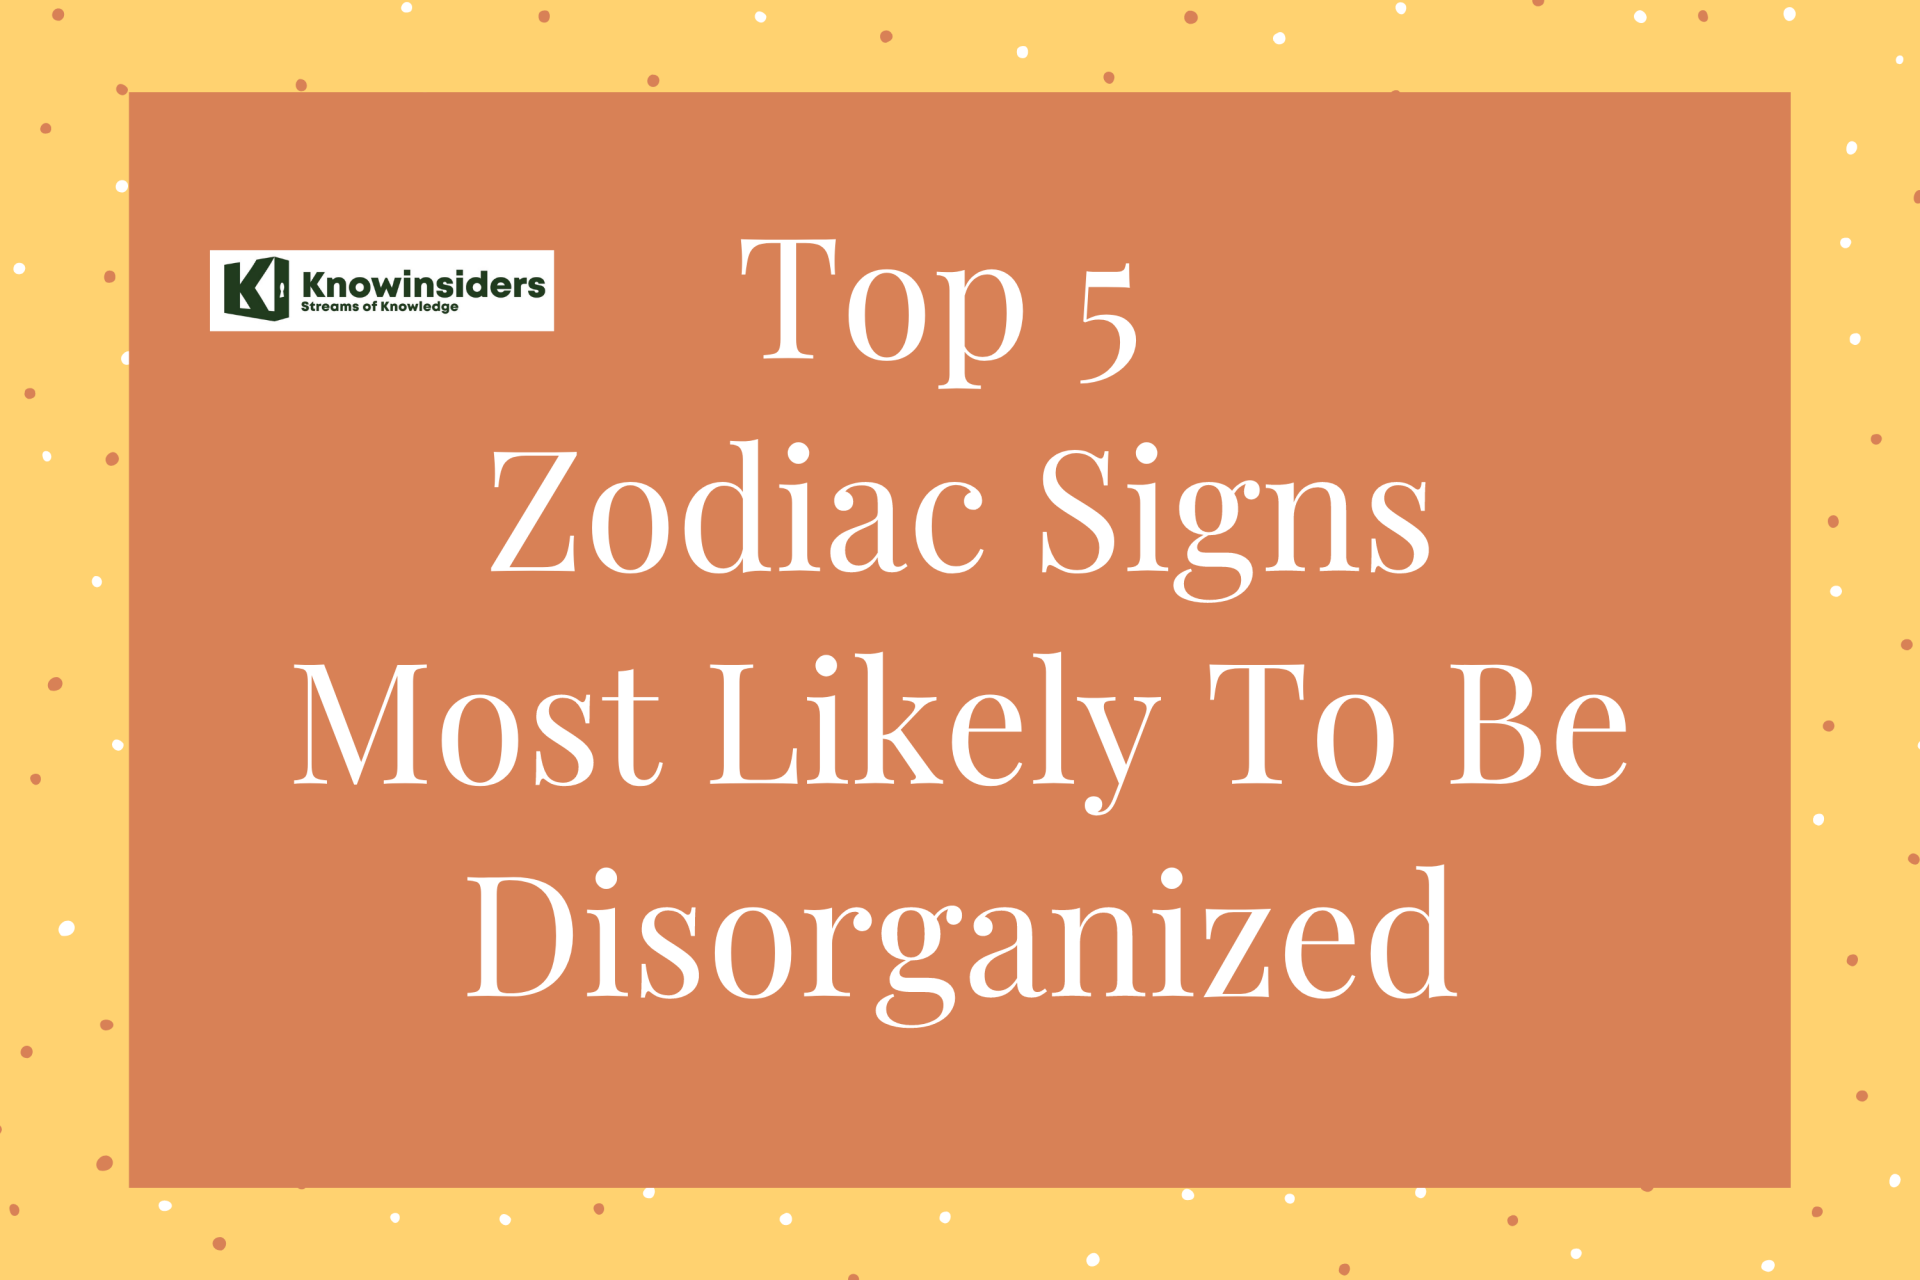 These 5 Zodiac Signs That Are Always Disorganized - Top Messiest Zodiac Signs